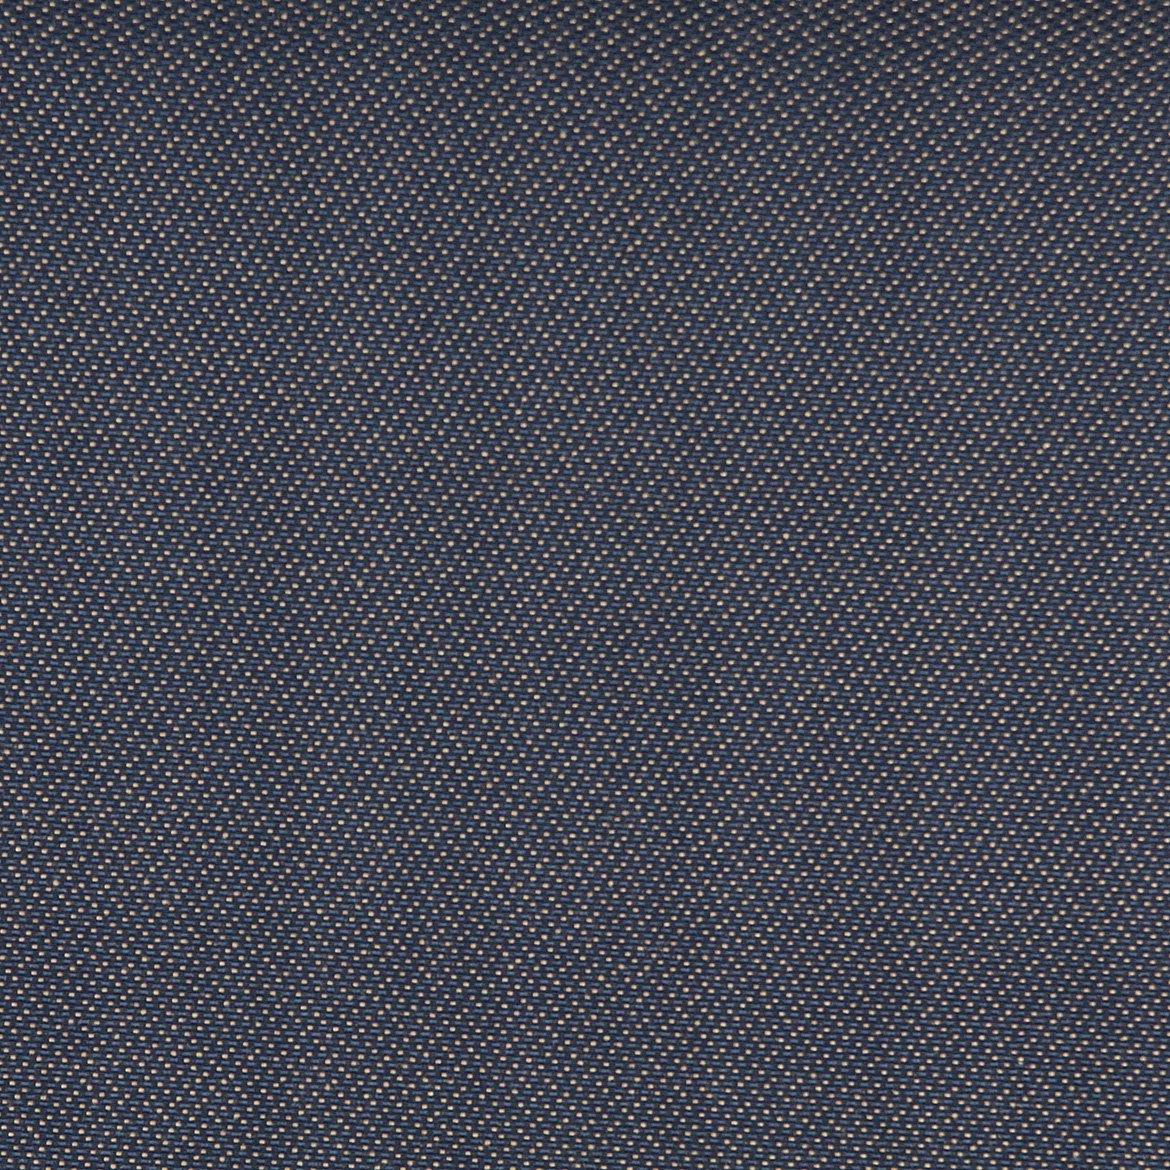 54"" C744 Navy and Gold, Speckled, Durable Upholstery Fabric By The Yard